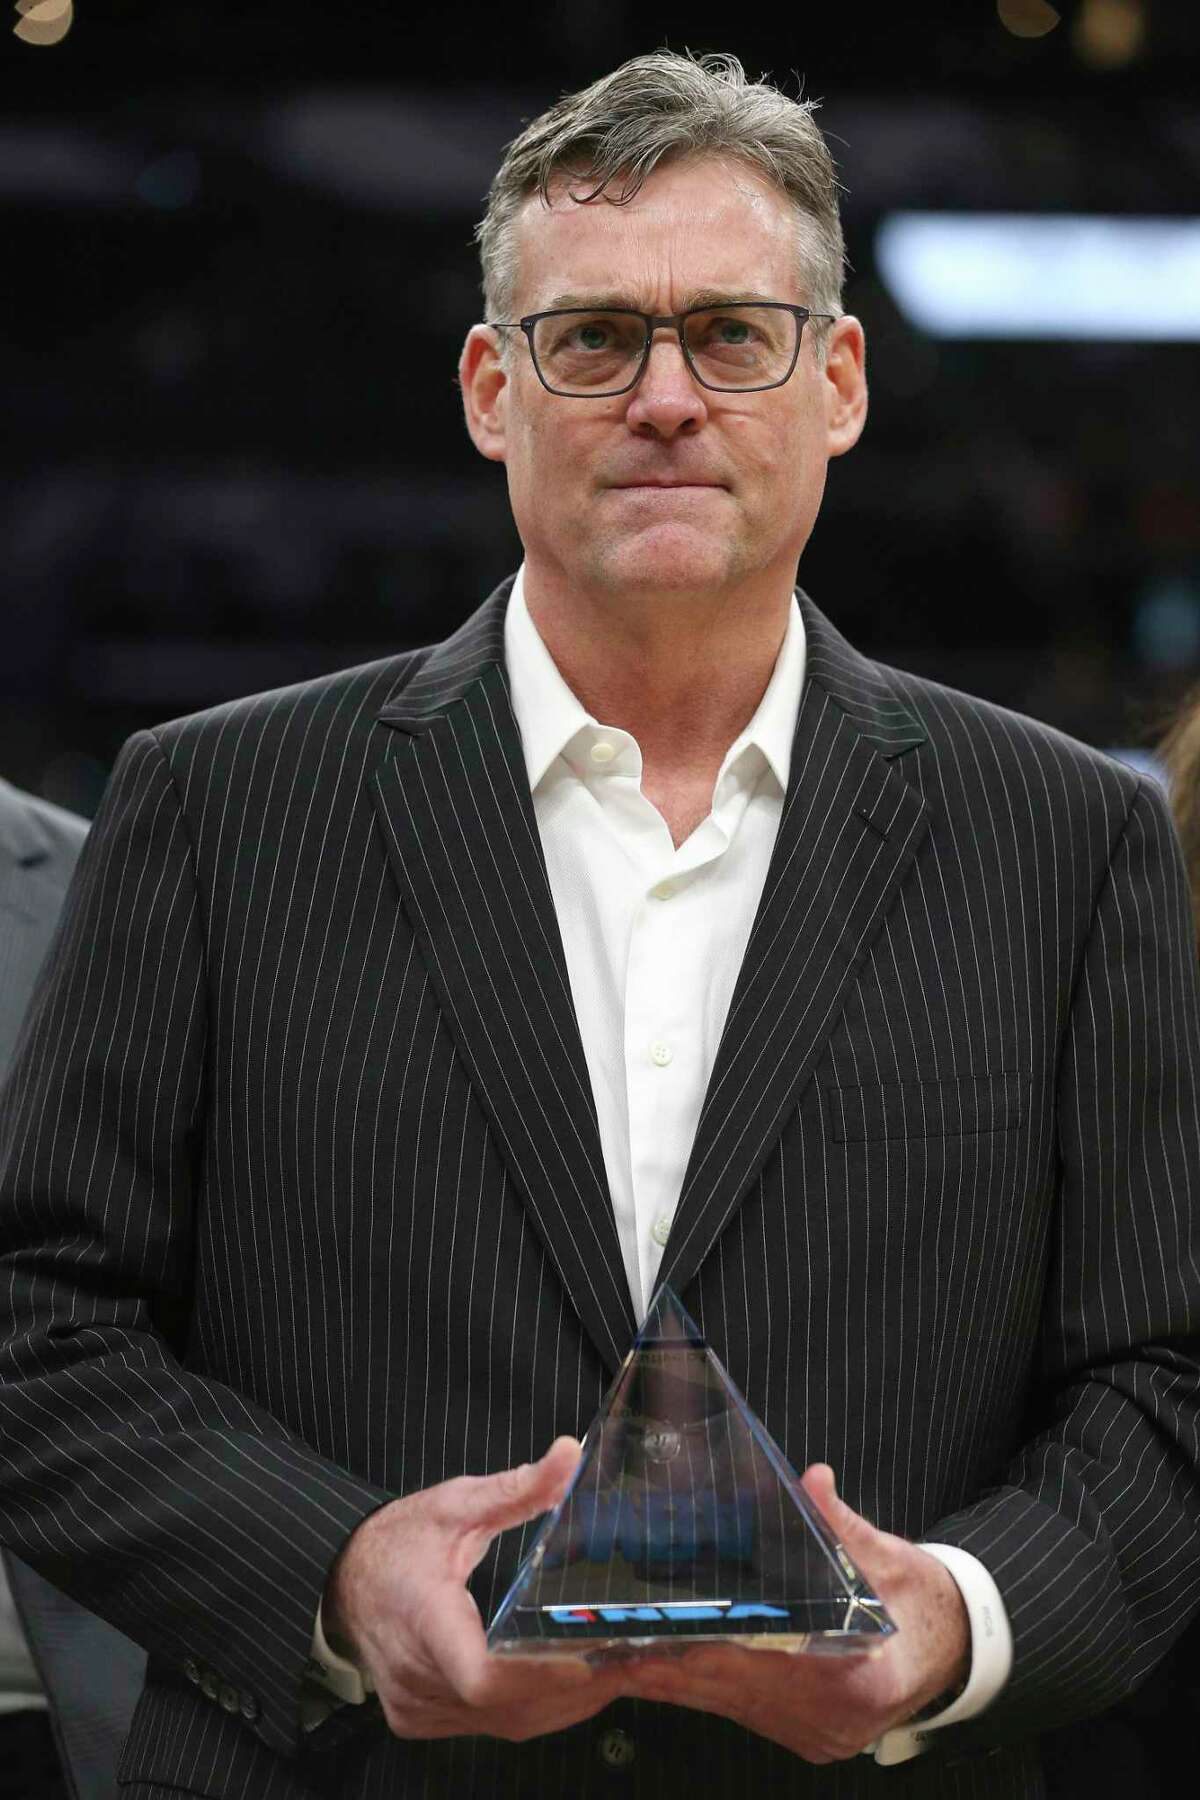 San Antonio Spurs General Manager R.C. Buford is presented with the National Basketball Association executive of the year award before game five in the Western Conference semi finals against the Oklahoma City Thunder at the AT&T Center, Tuesday, May 10, 2016.